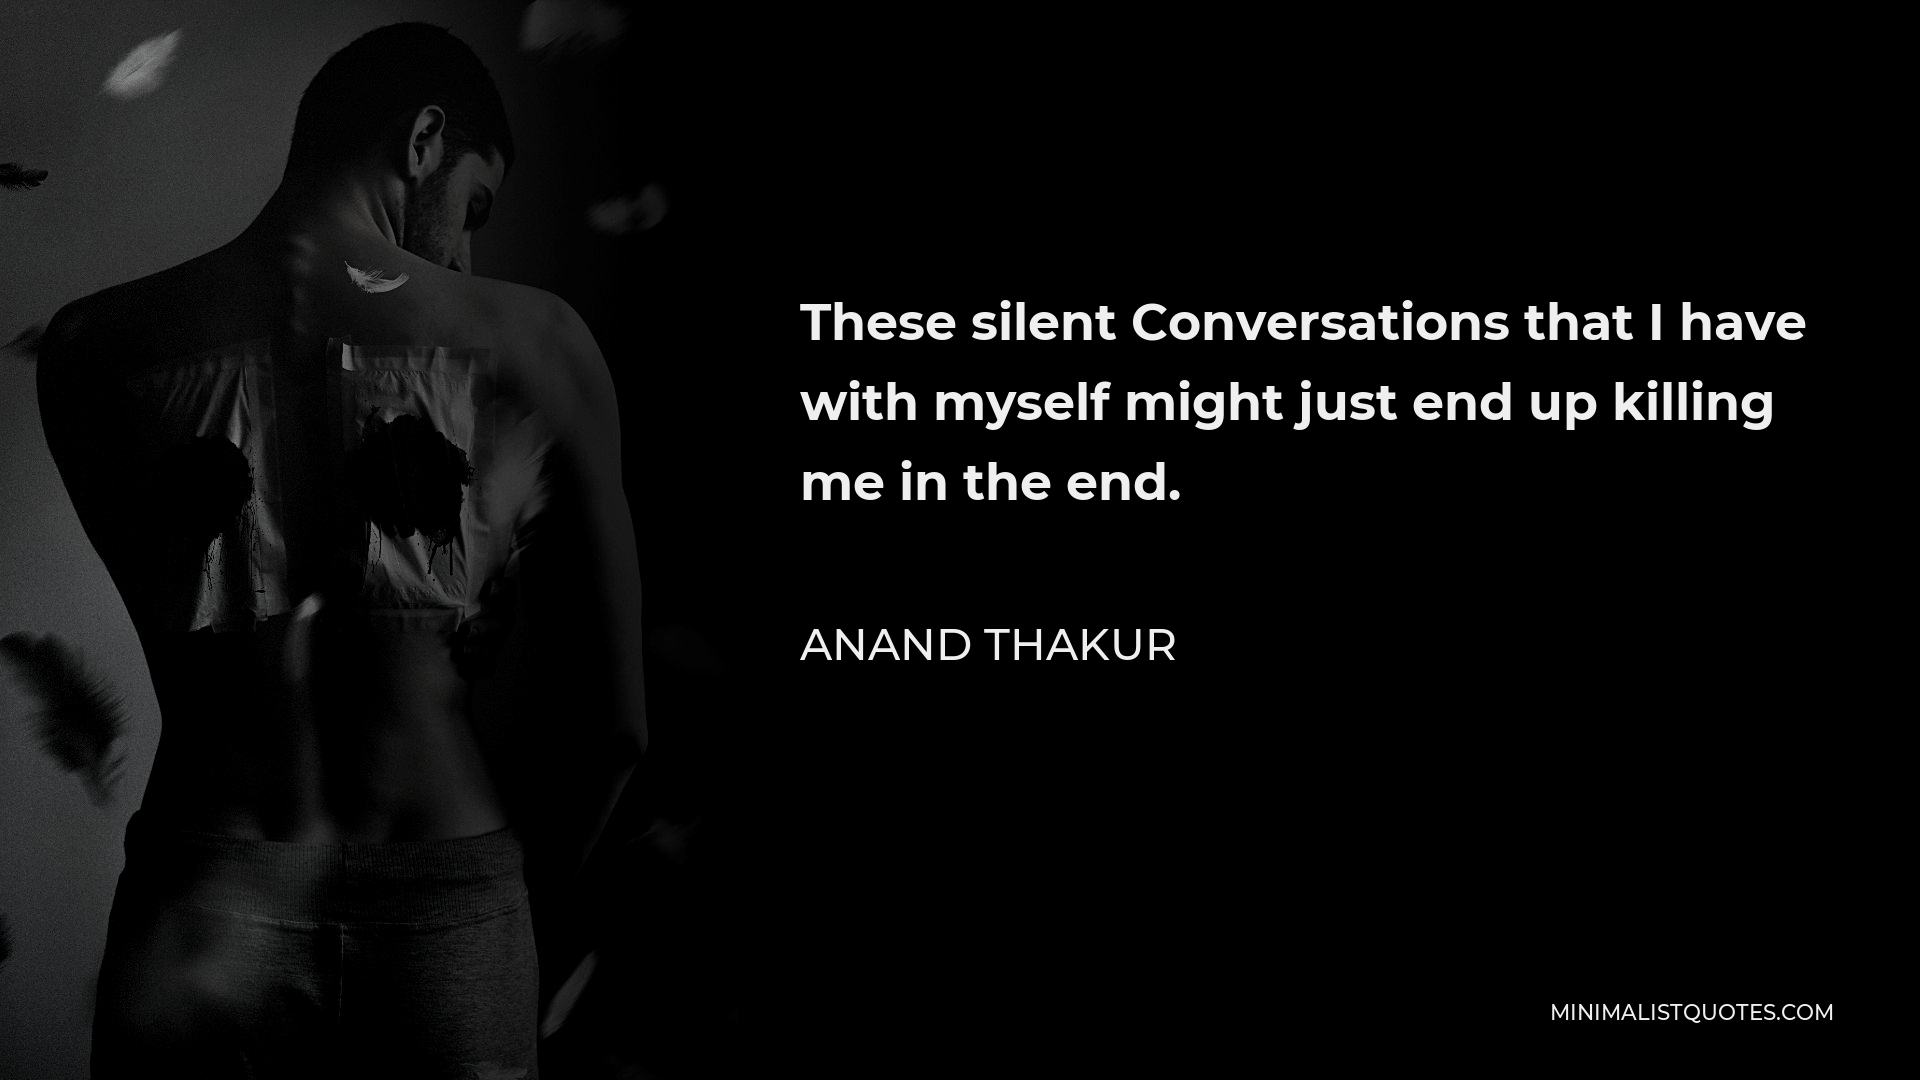 Anand Thakur Quote - These silent Conversations that I have with myself might just end up killing me in the end.